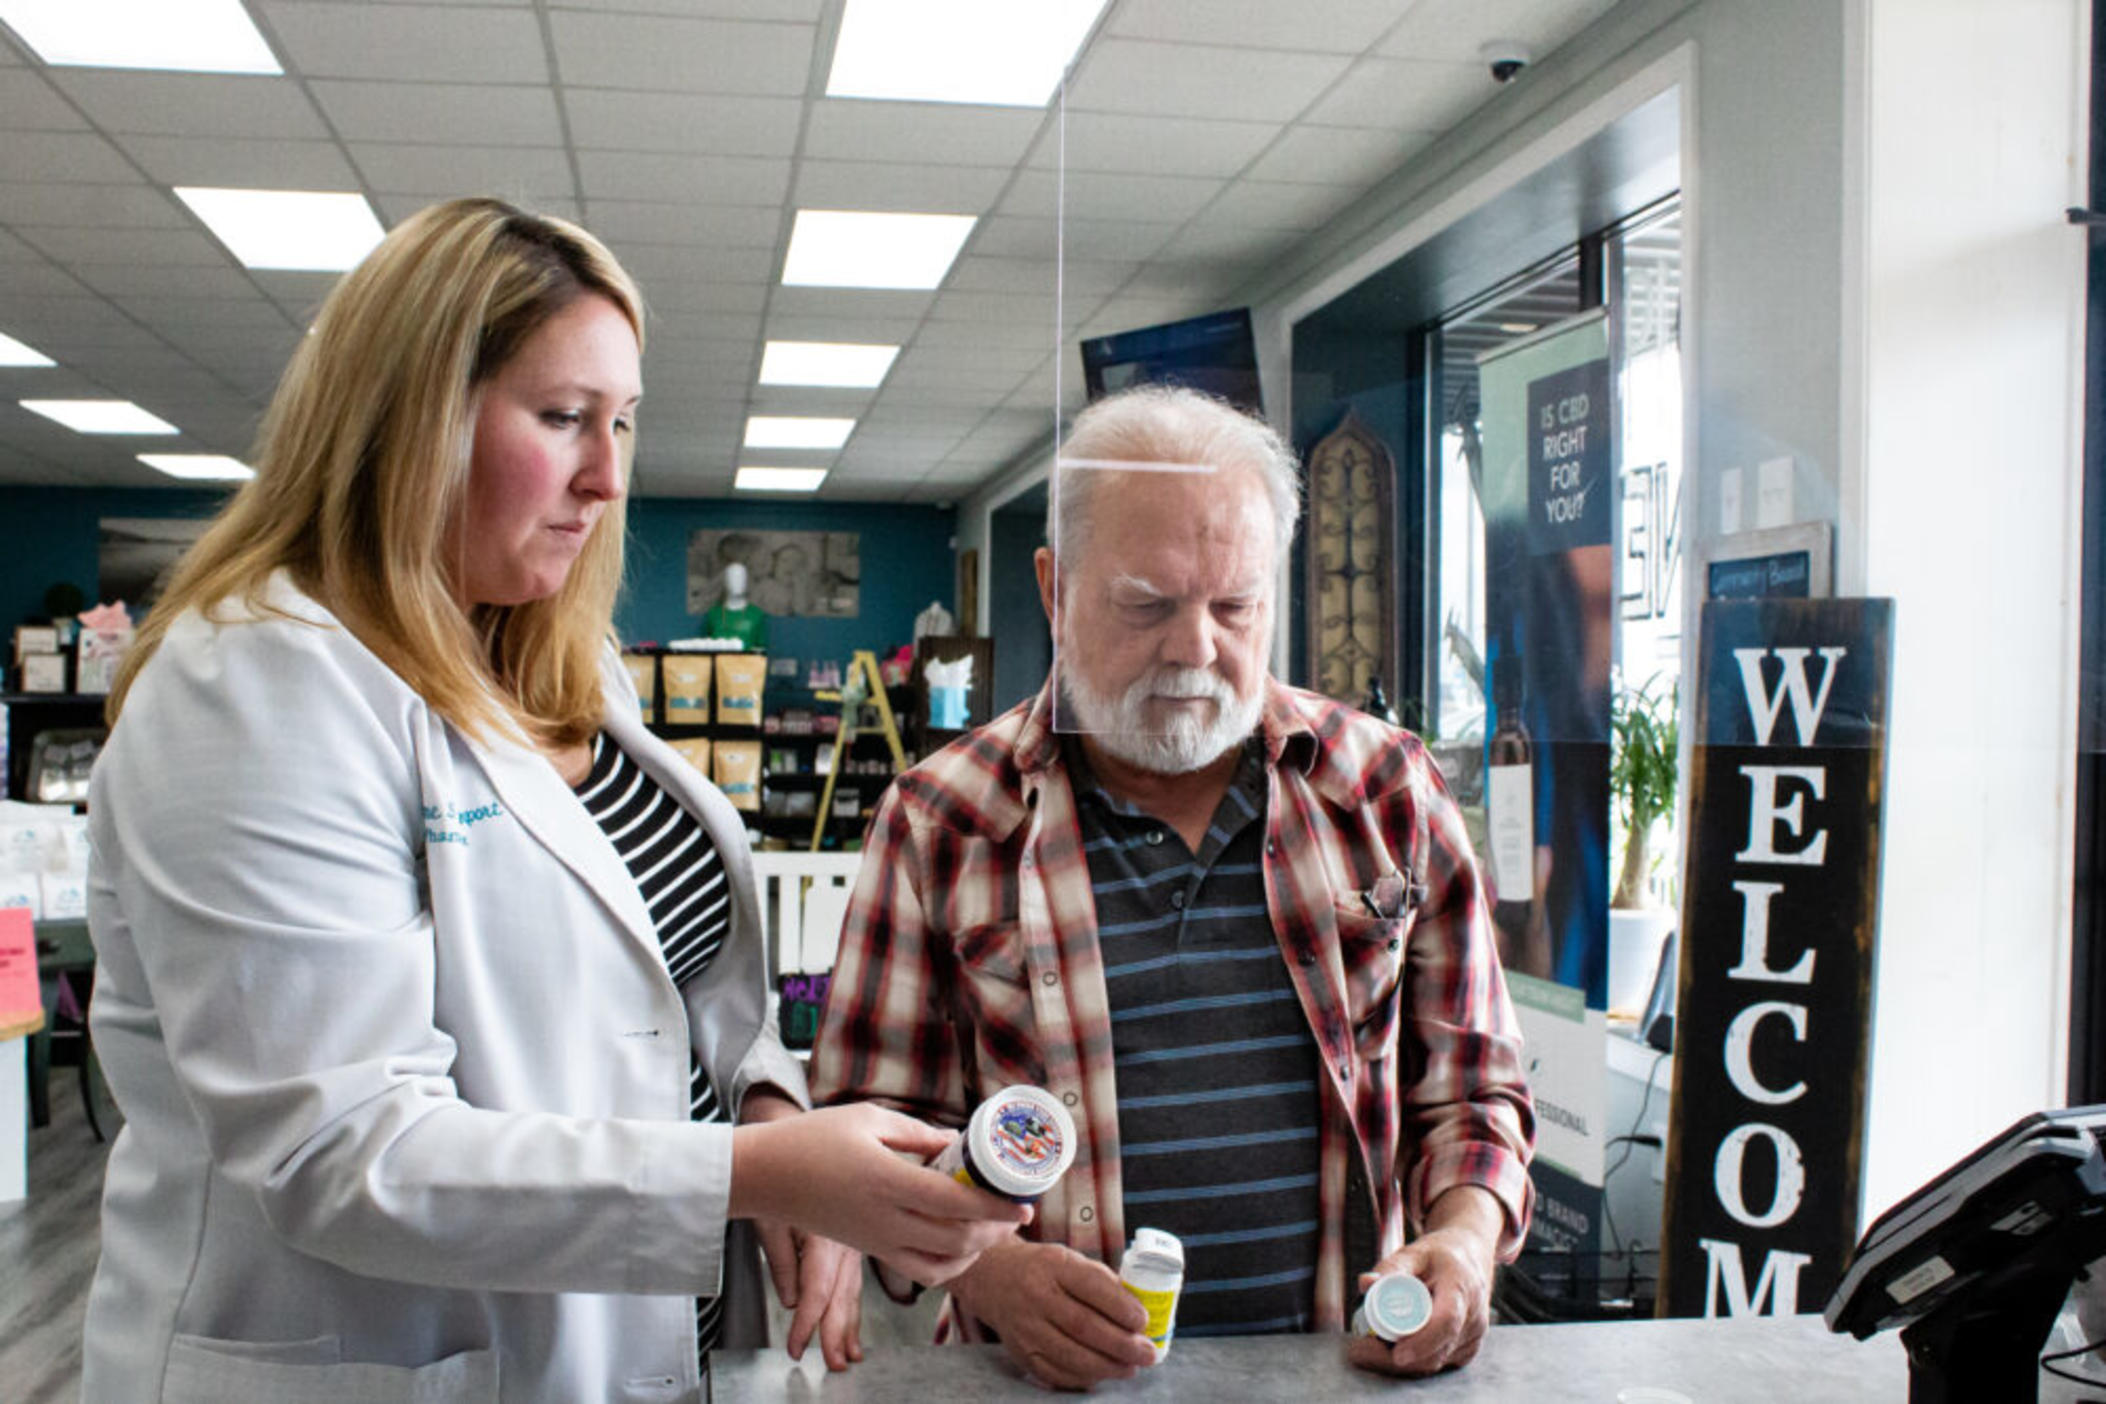 Pharmacist Suzanne Davenport (left) answers a question for patient Mike Britton (right) about his prescription at Southern Drug Company in Blue Ridge, Ga. on March 7.